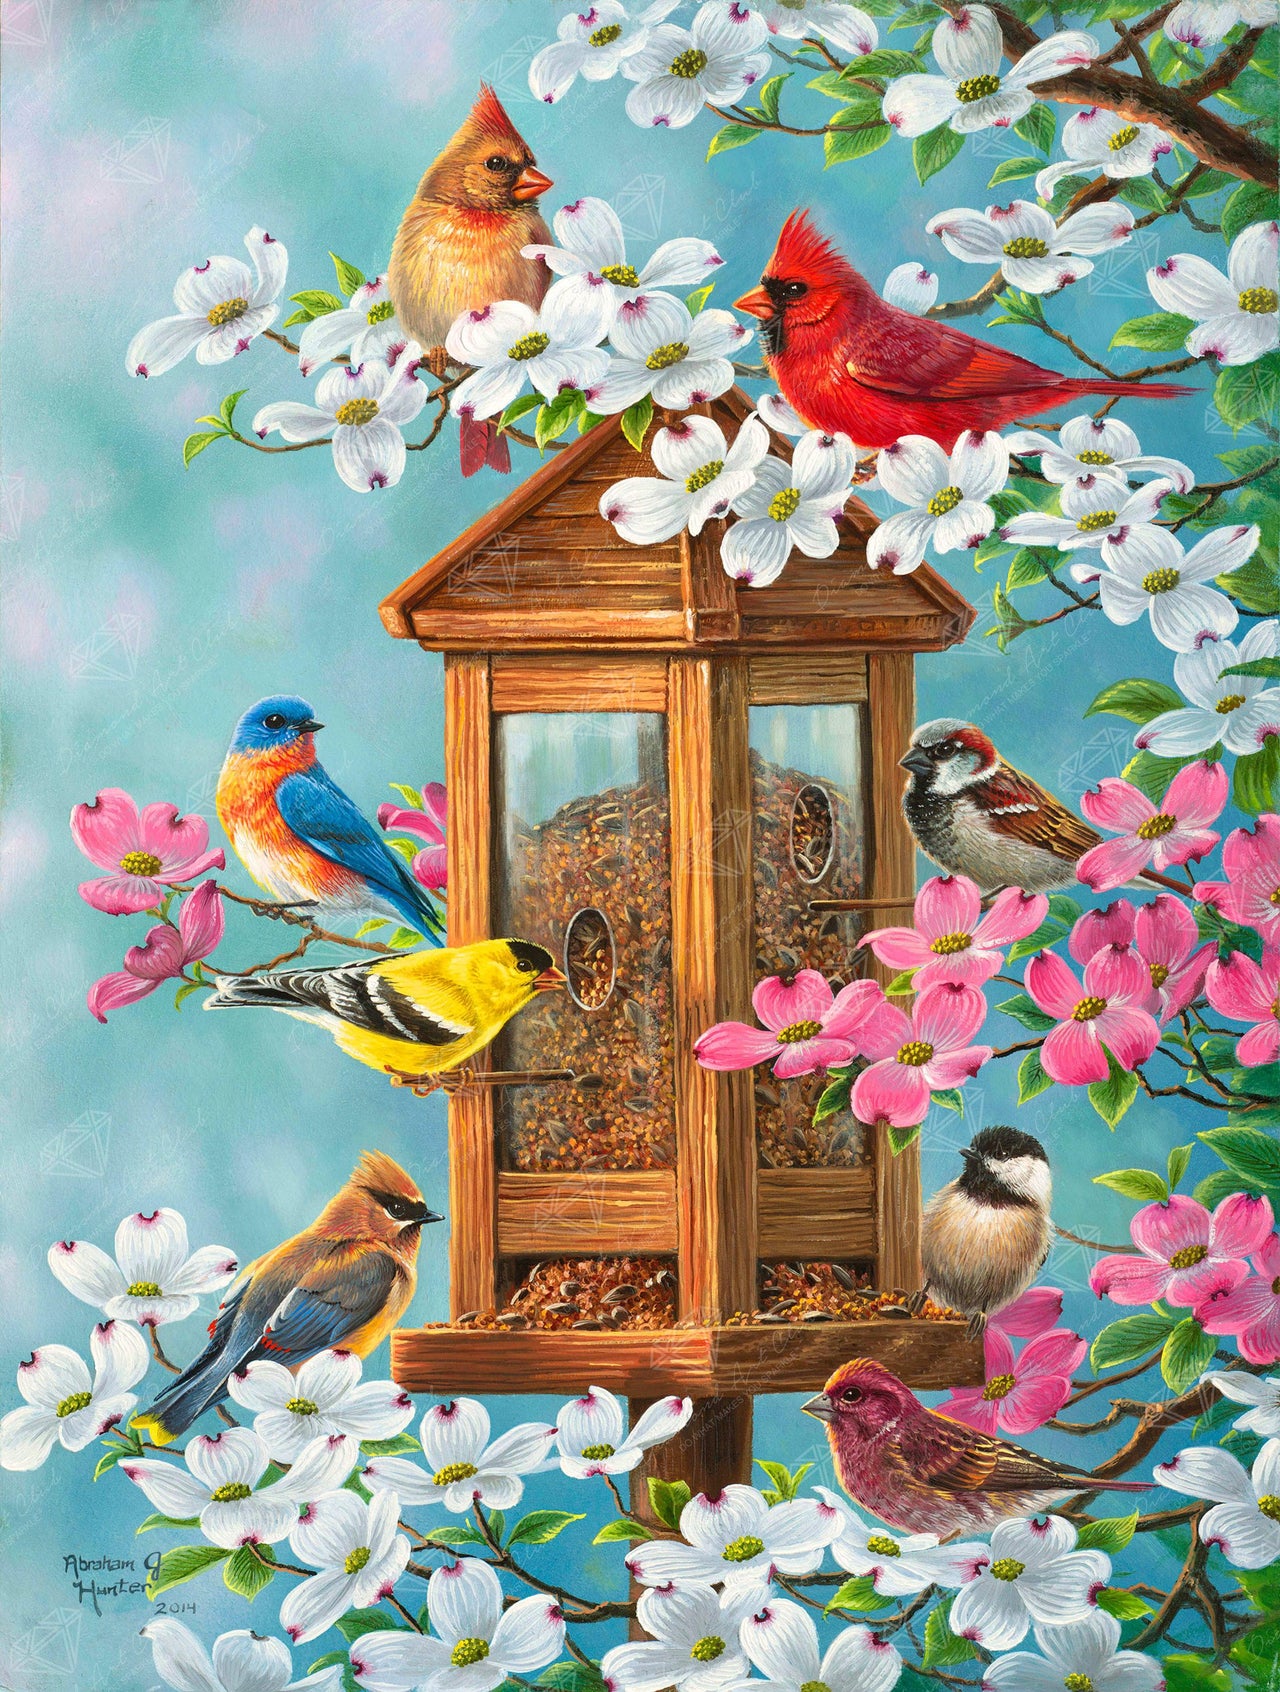 Diamond Painting Joys of Spring 22" x 29" (55.8cm x 73.7cm) / Round with 54 Colors including 4 ABs / 52,337